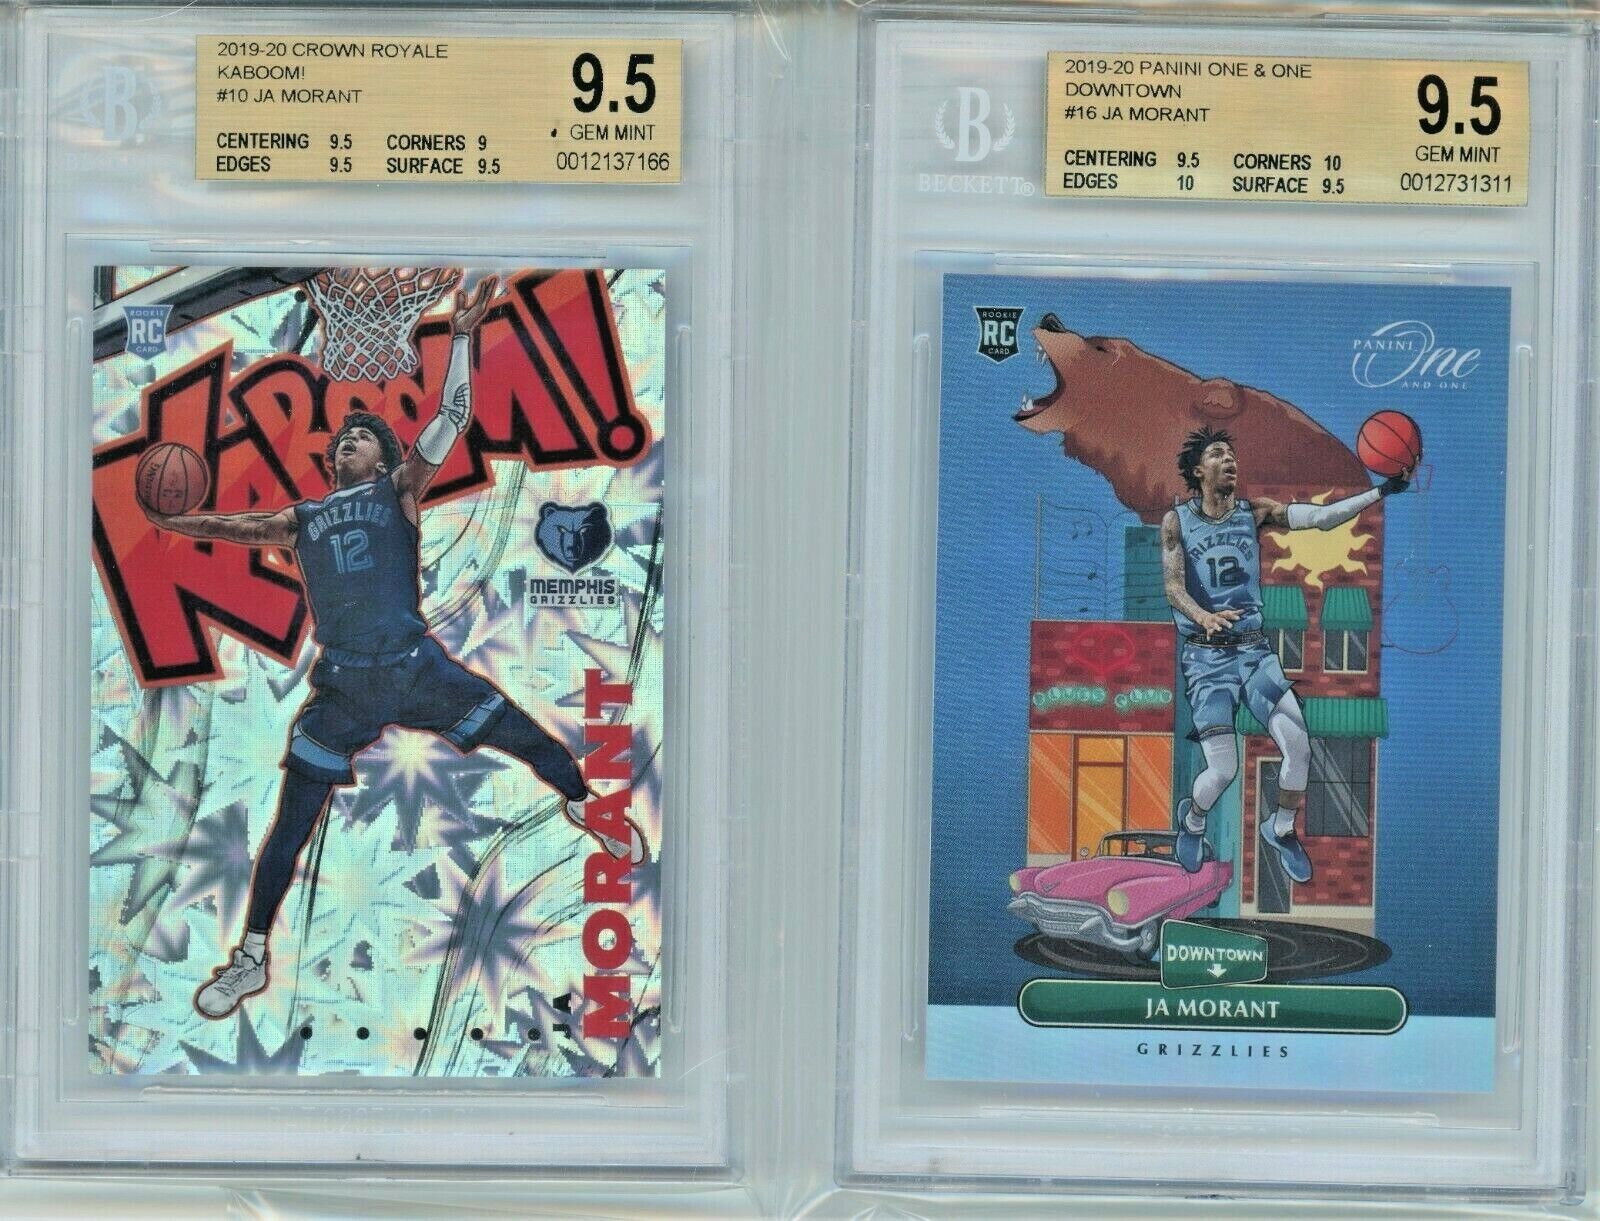 2019-20 Ja Morant Crown Royale KABOOM & Panini One and One Downtown RC BGS 9.5